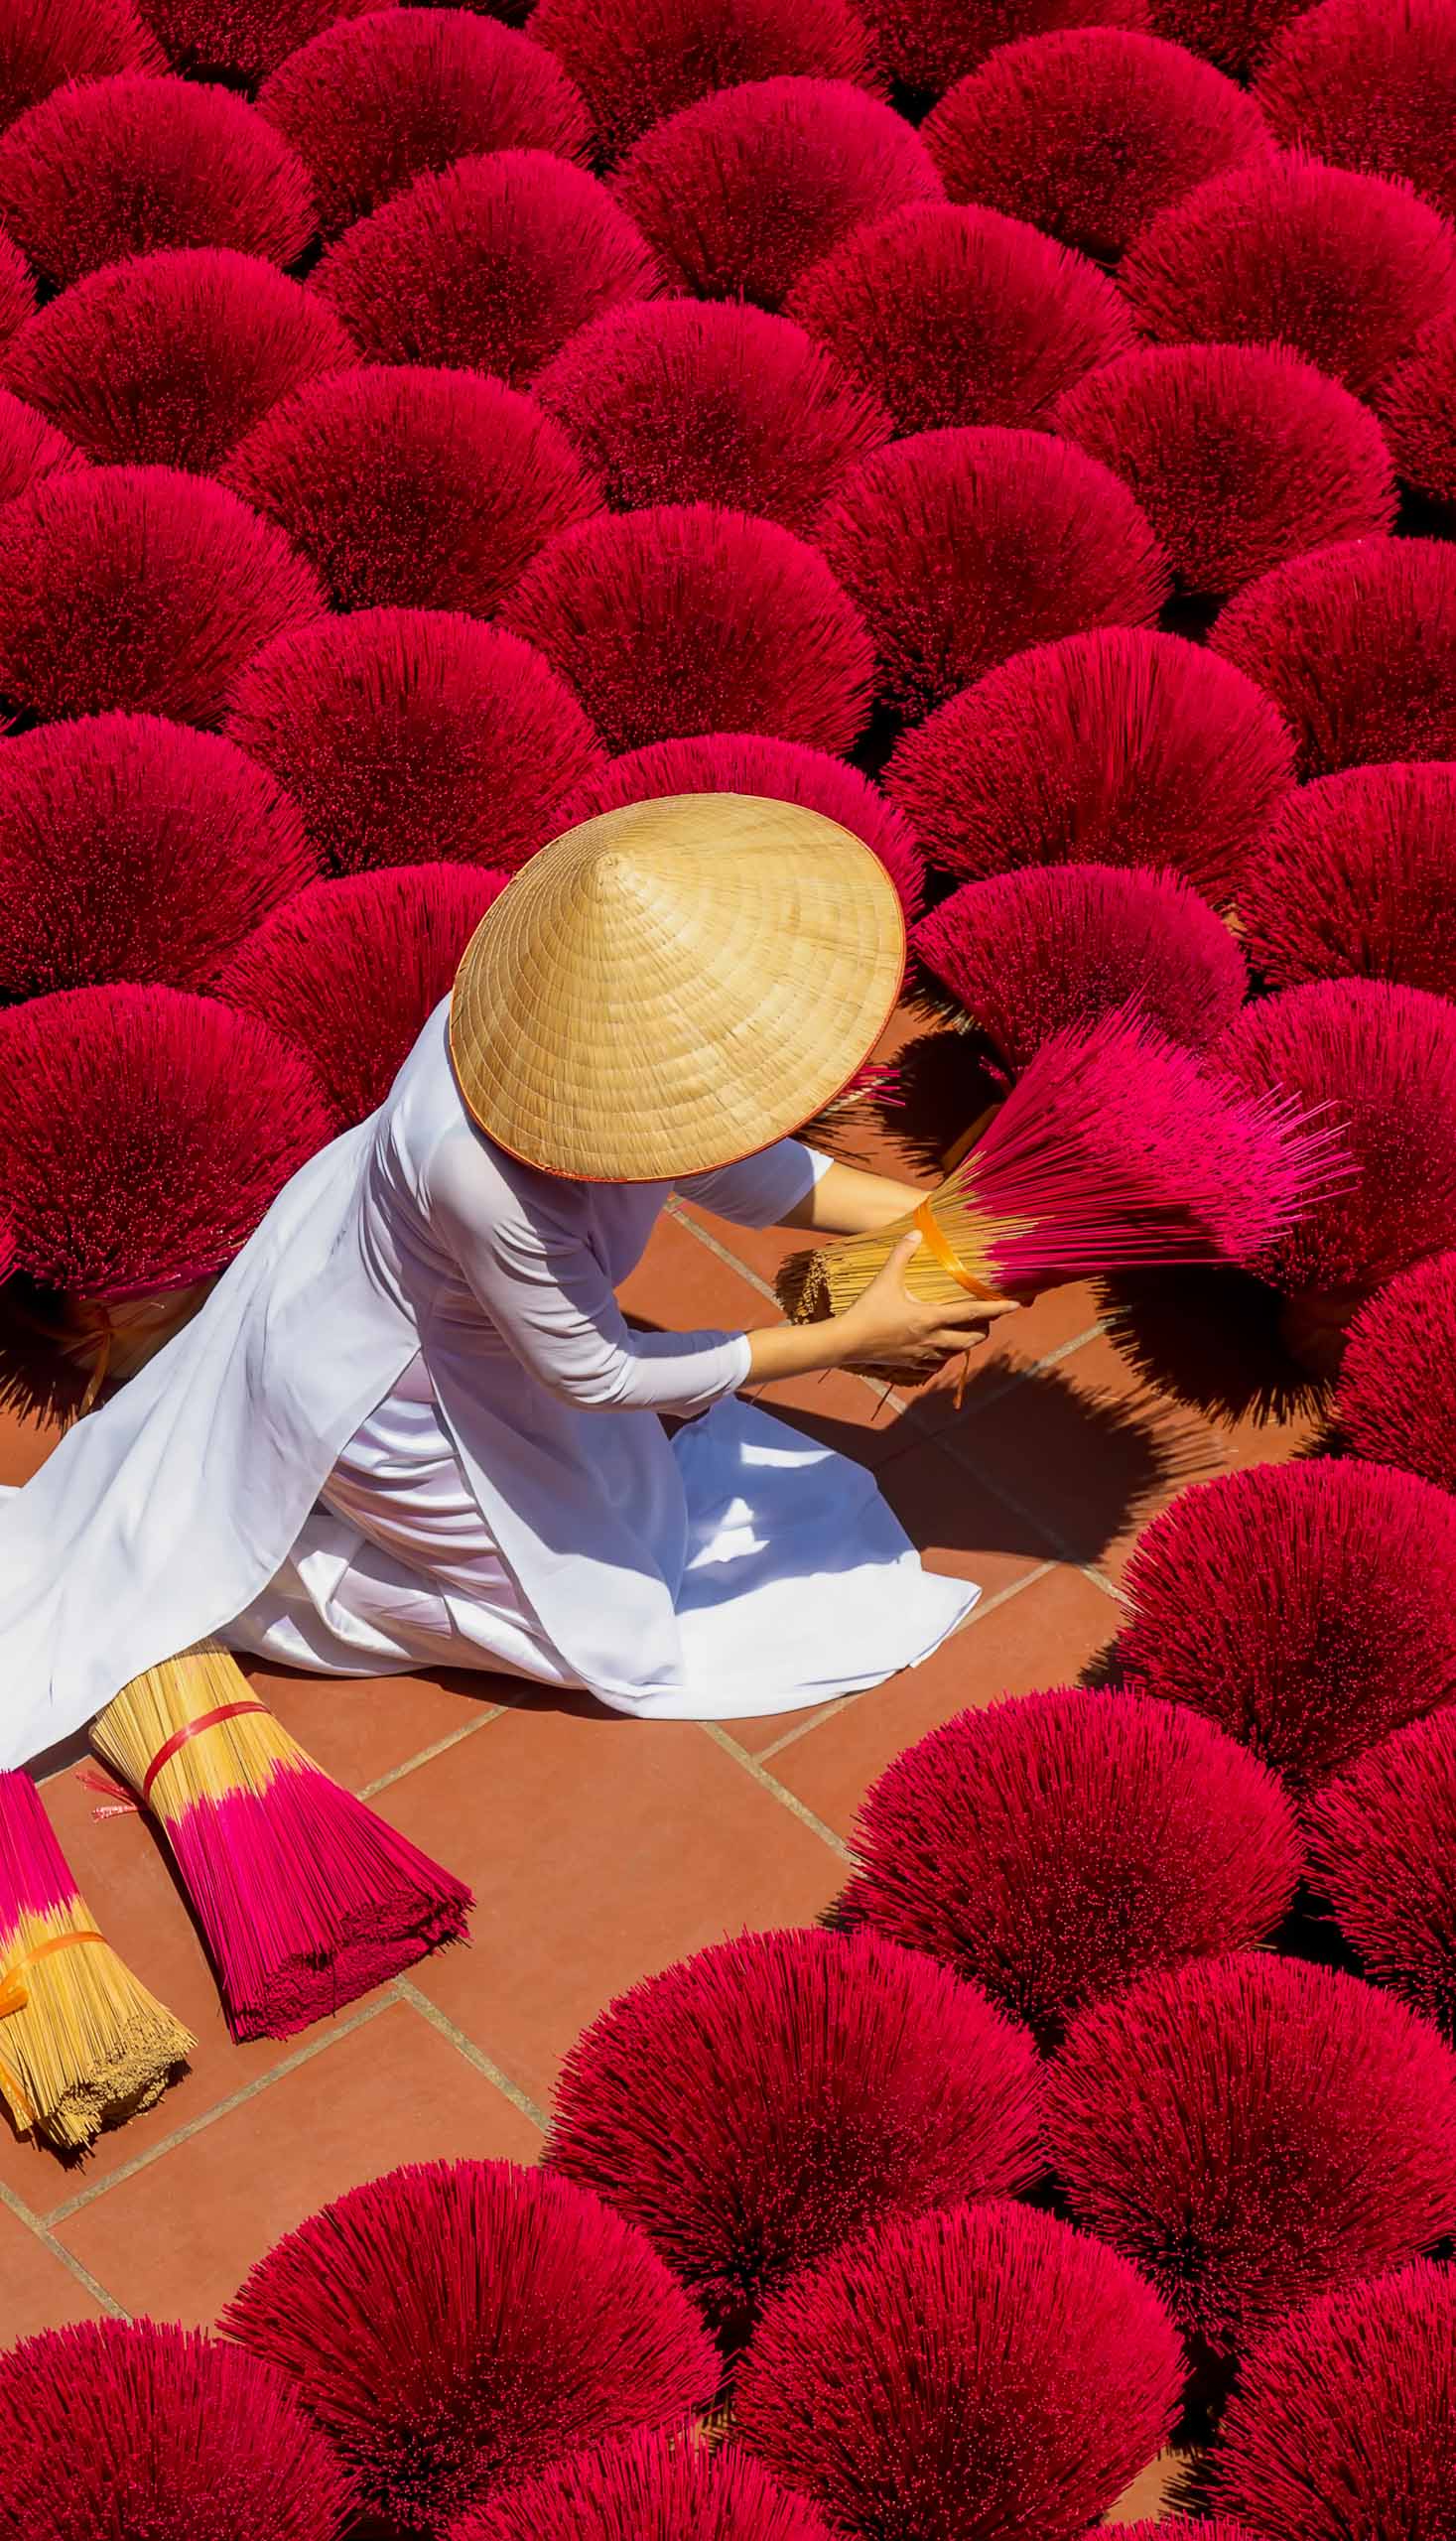 Incense sticks drying outdoor with Vietnamese woman wearing conical hat in Hanoi, Vietnam.